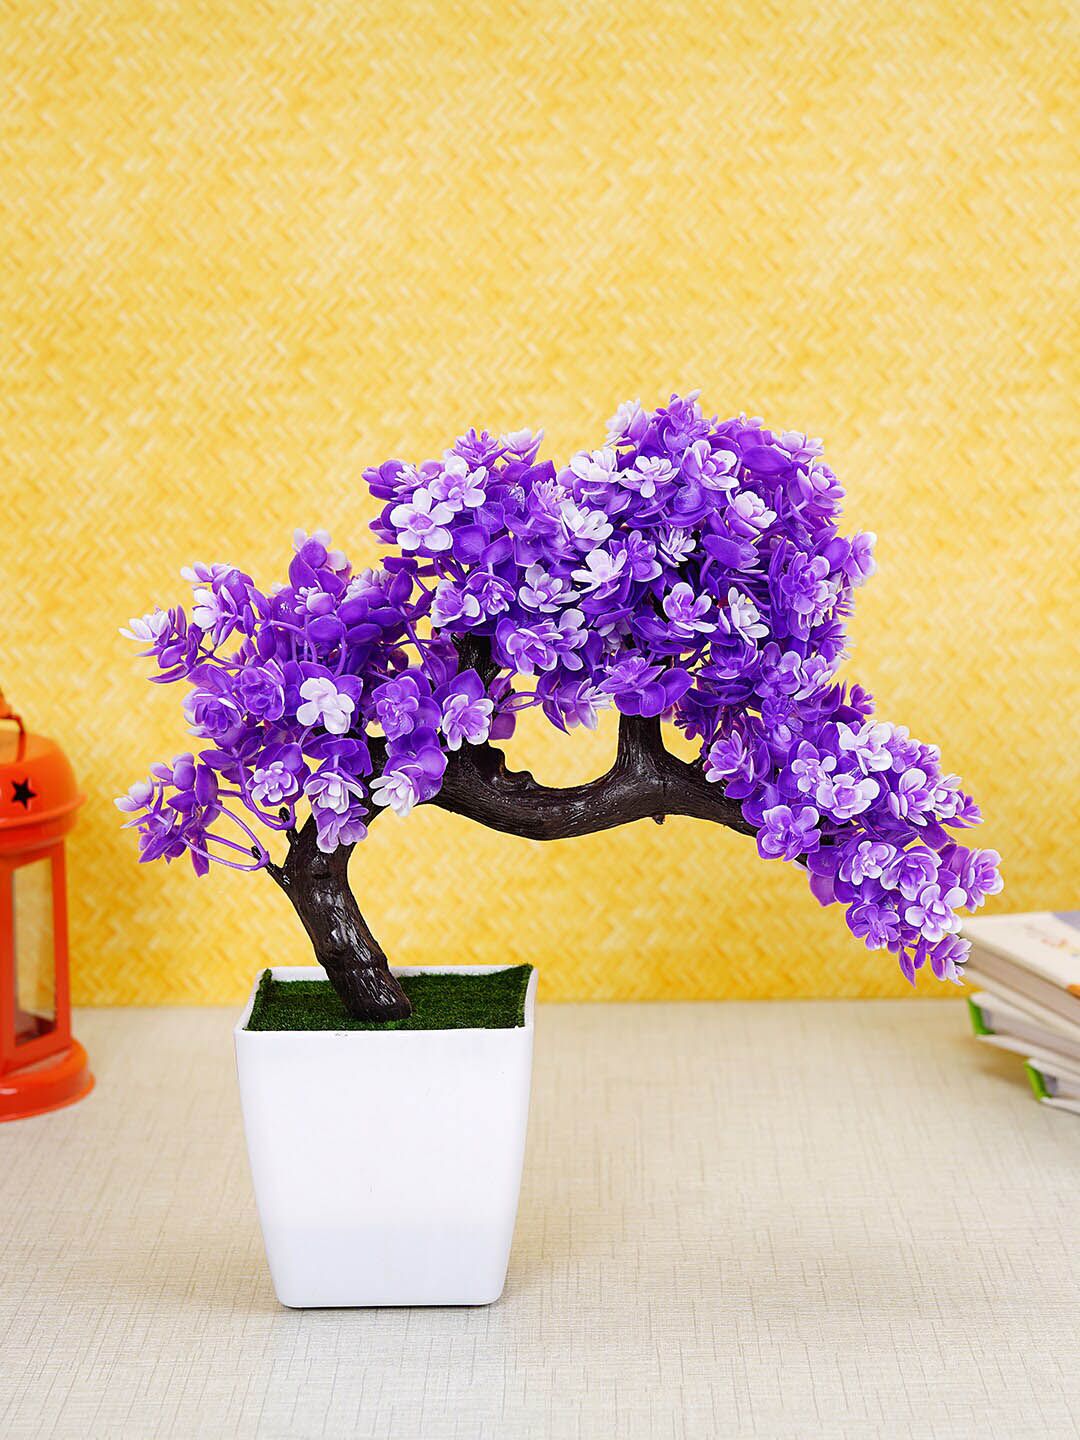 Dekorly Purple & White Artificial Flower & Plant With Pot Price in India